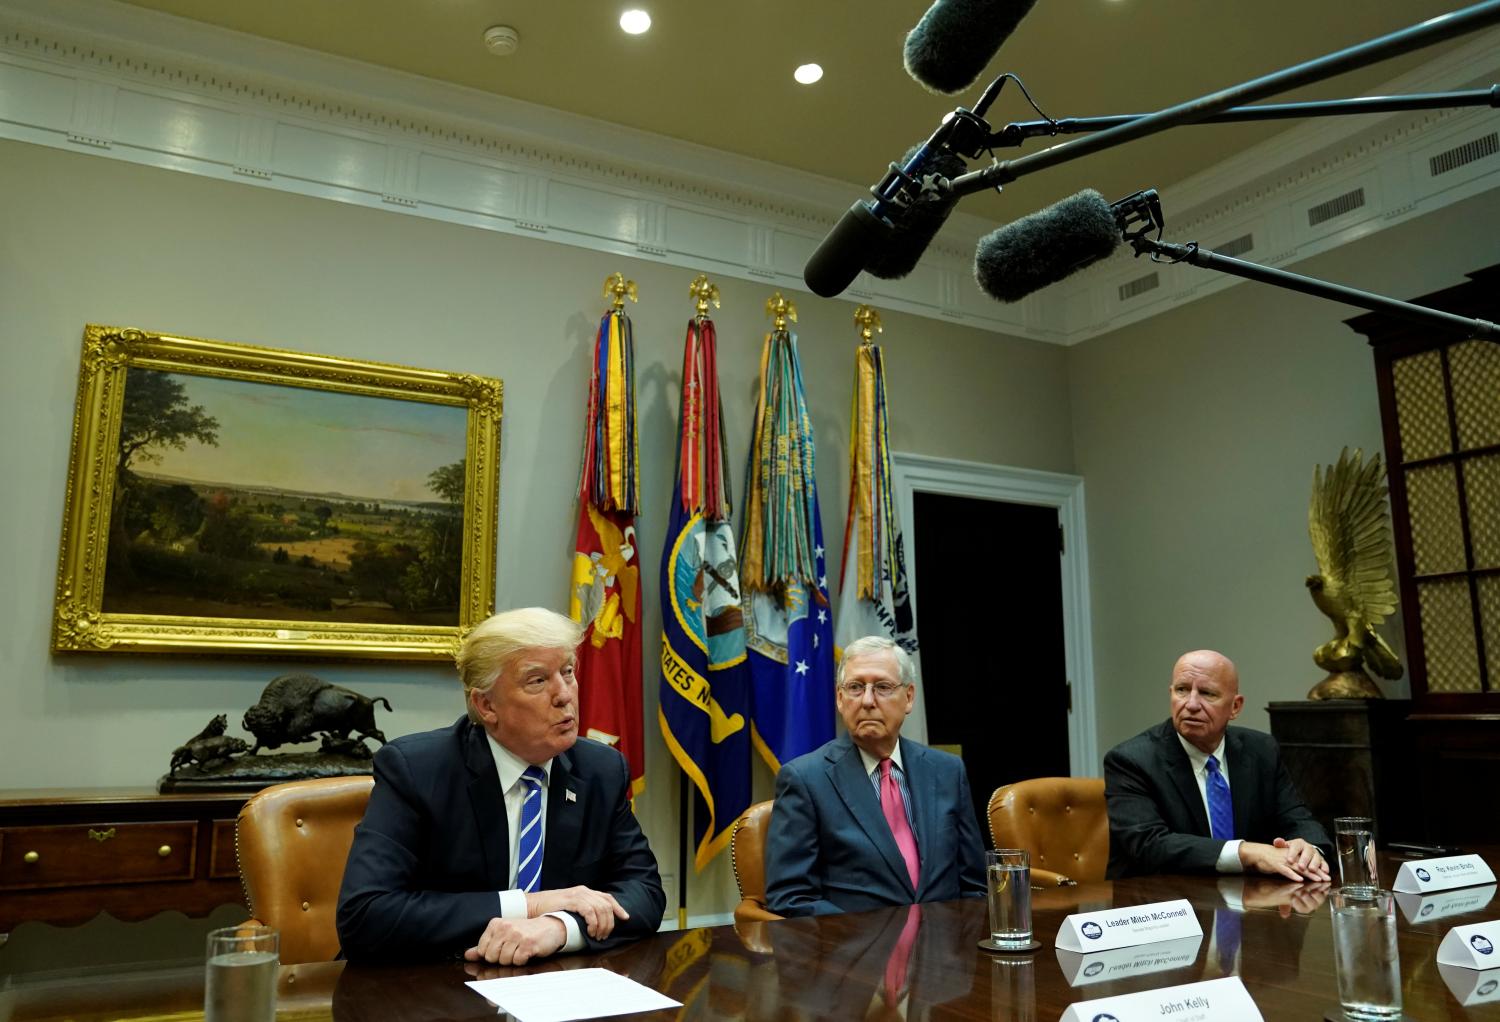 U.S. President Donald Trump speaks as Senate Majority Leader Mitch McConnell (R-KY) and Chairman of the House Ways and Means Committee Kevin Brady (R-TX) listen during a meeting Republican Congressional leaders.